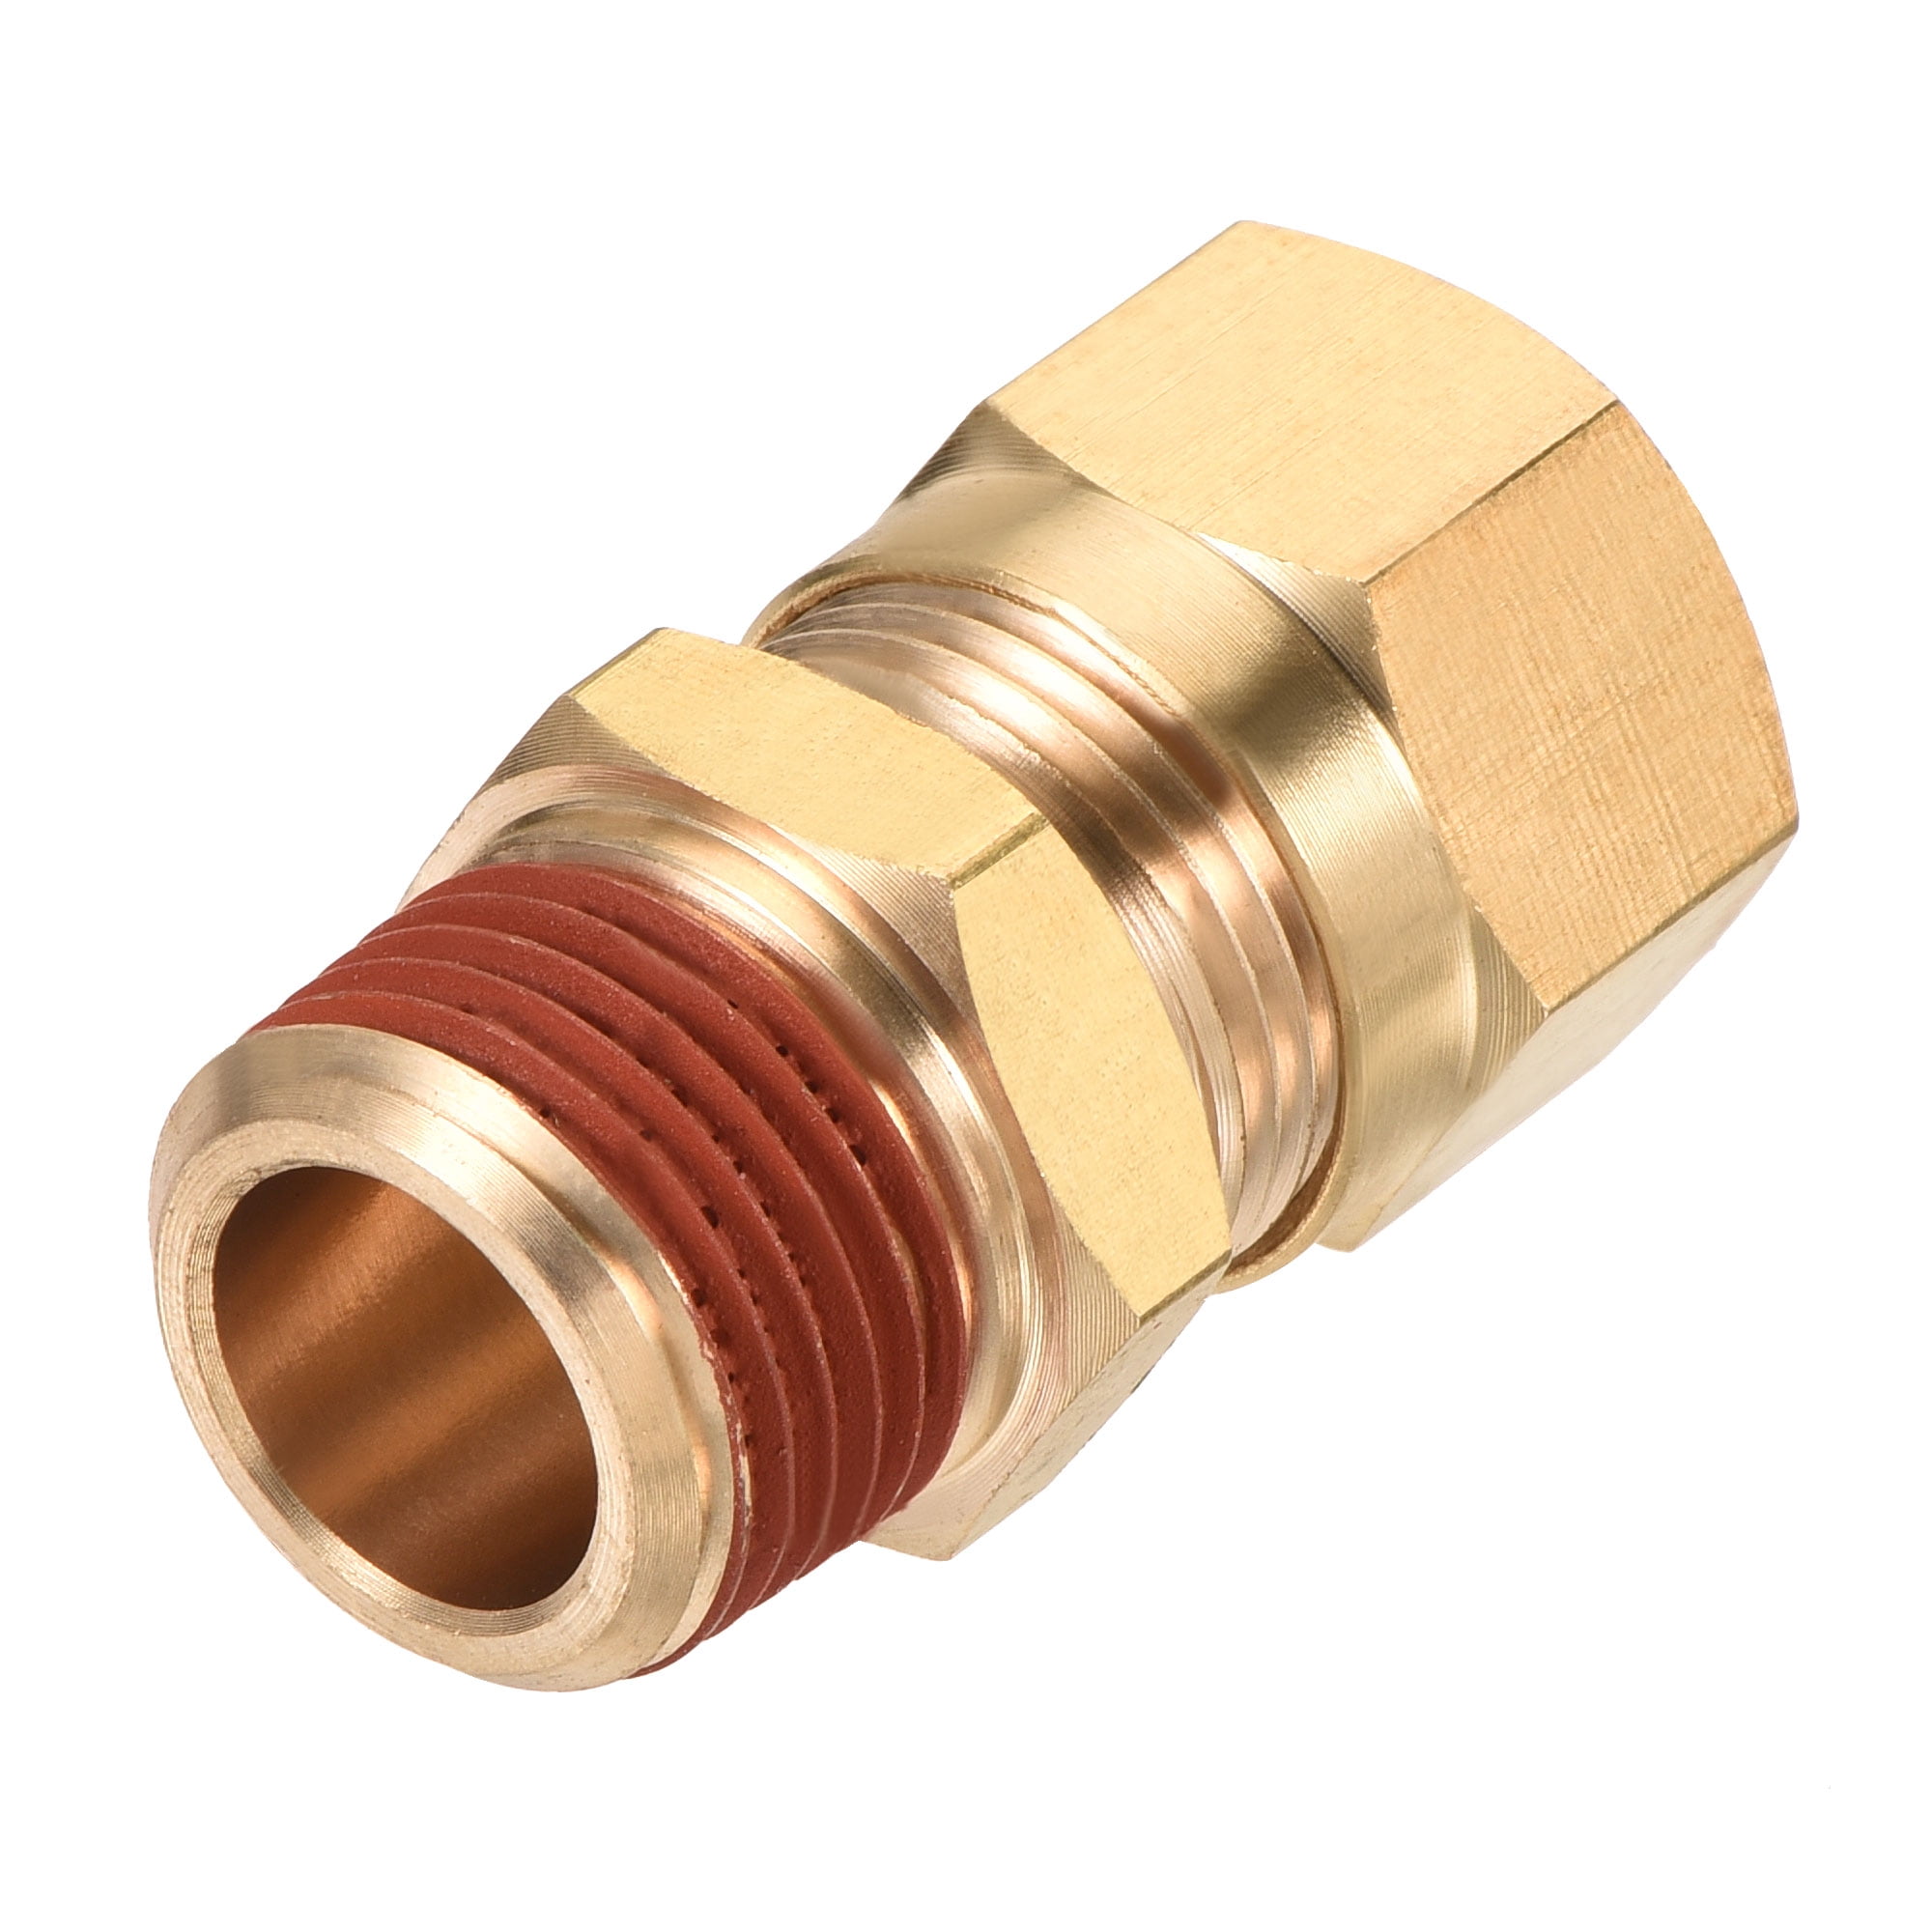 Uxcell Brass Compression Tube Fitting 1/4NPT x 3/8 Tube OD